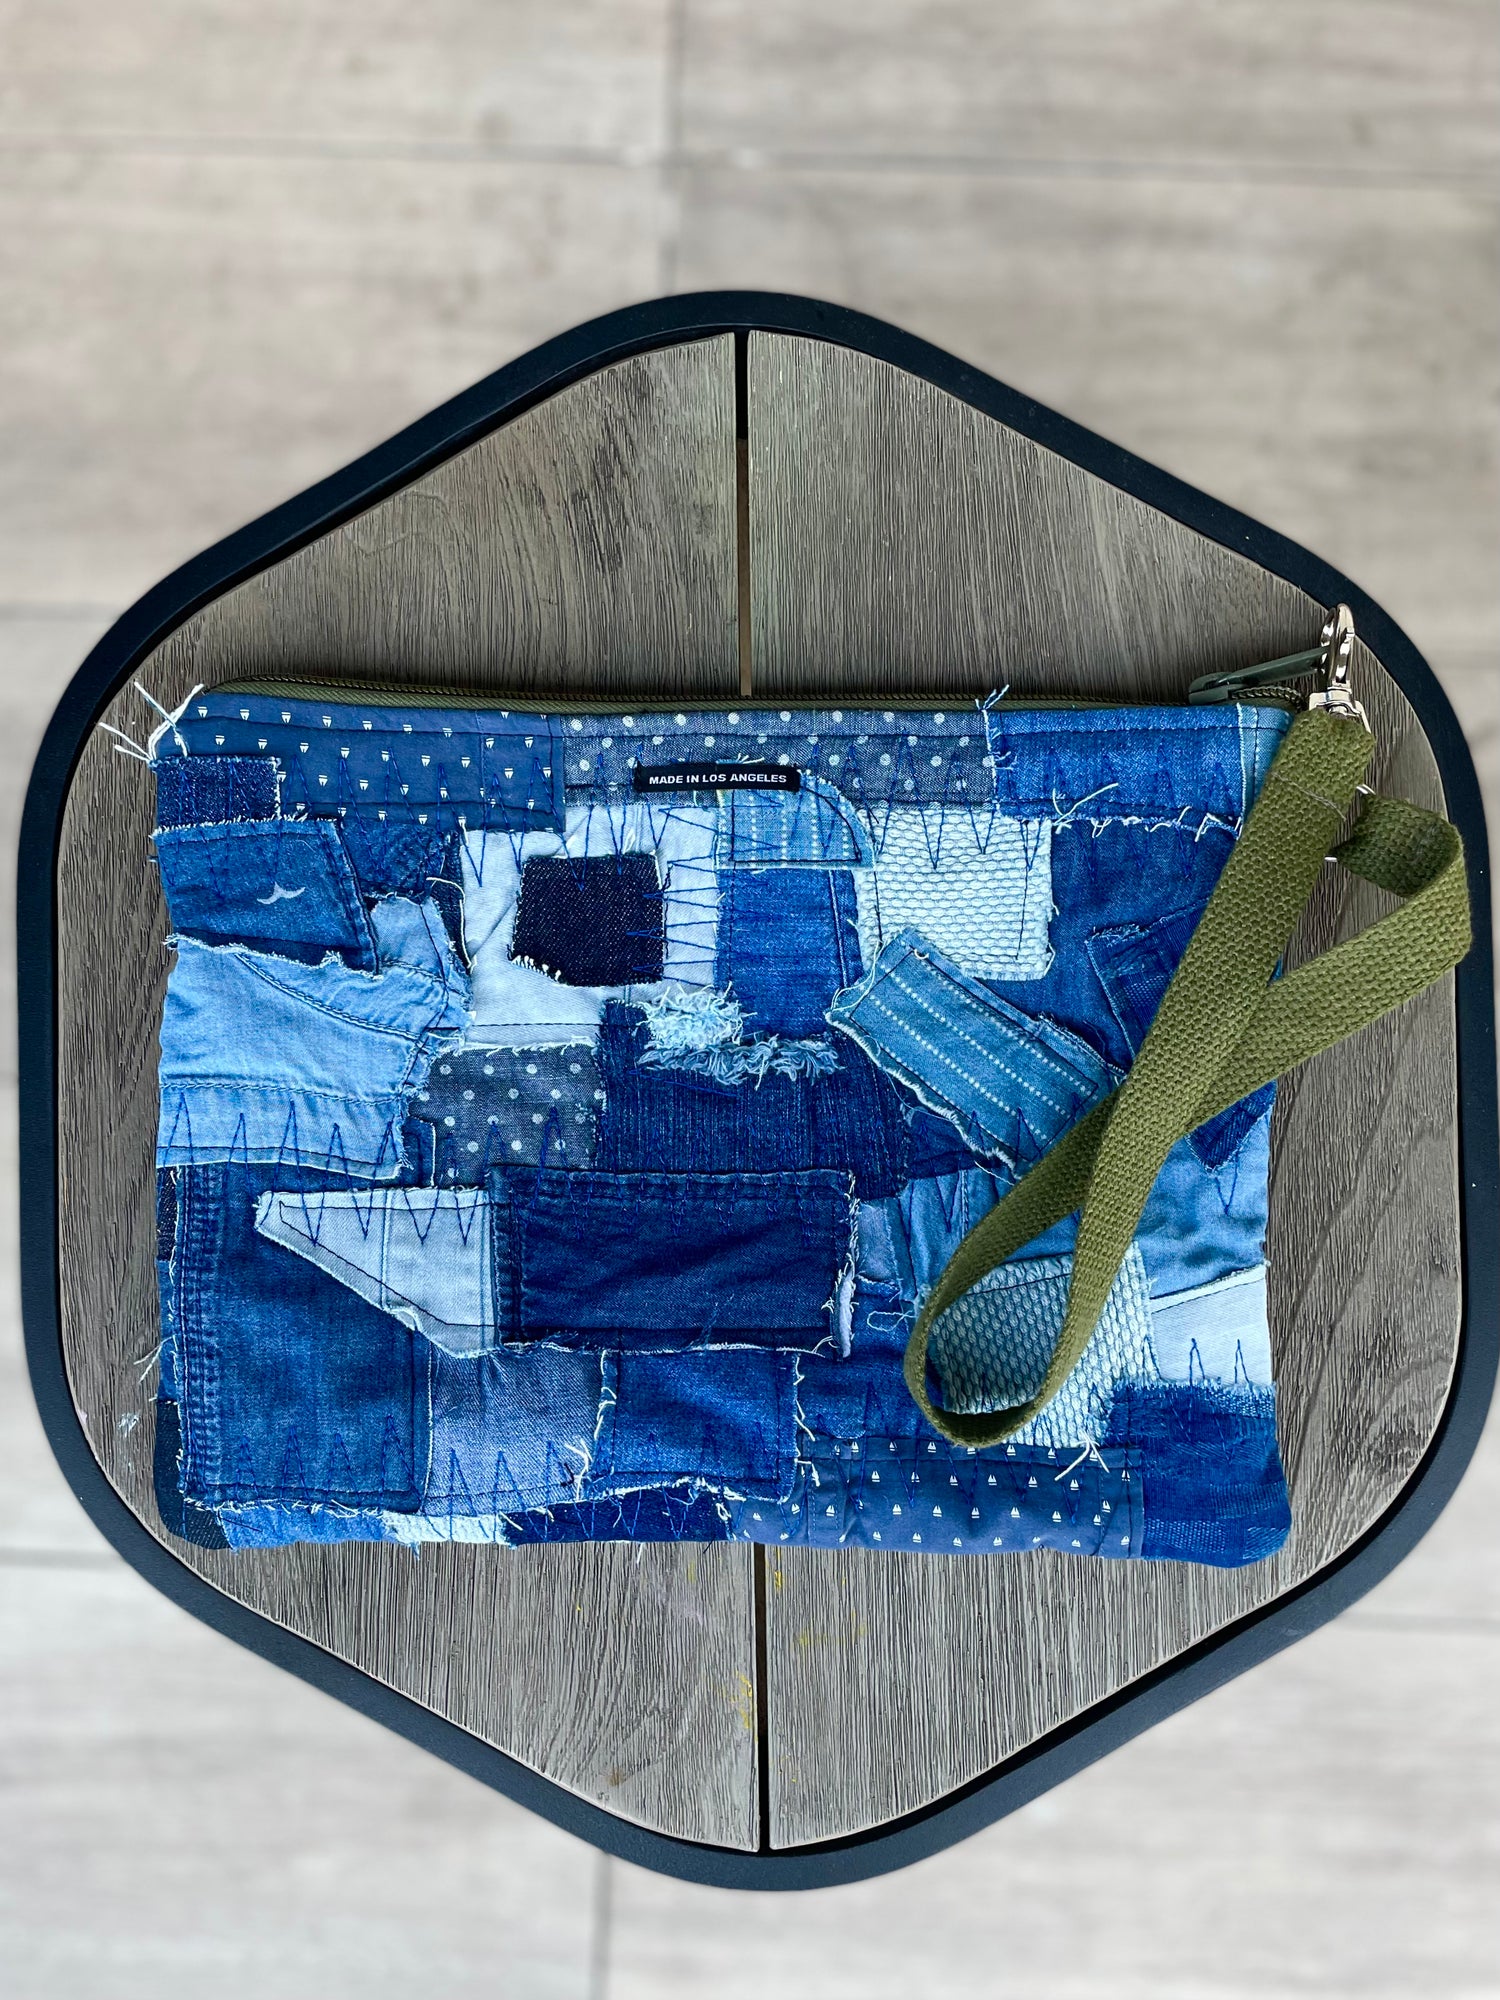 Pouch made from upcycled indigo patchwork denim. Green strap and green zipper. Multifunctional pouch photographed on natural wood stool